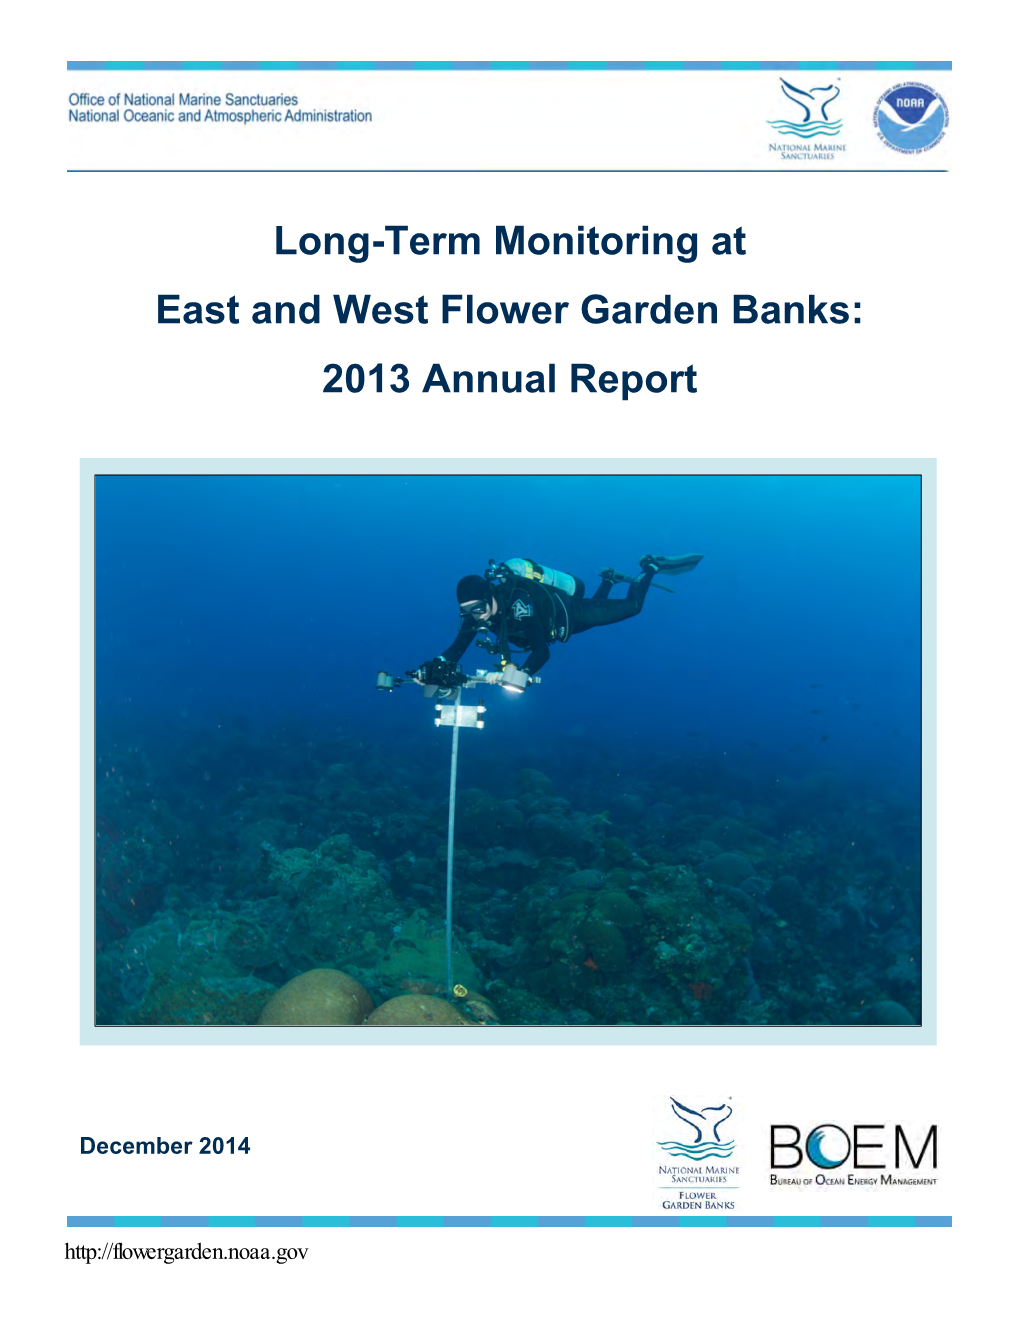 Long-Term Monitoring at East and West Flower Garden Banks: 2013 Annual Report